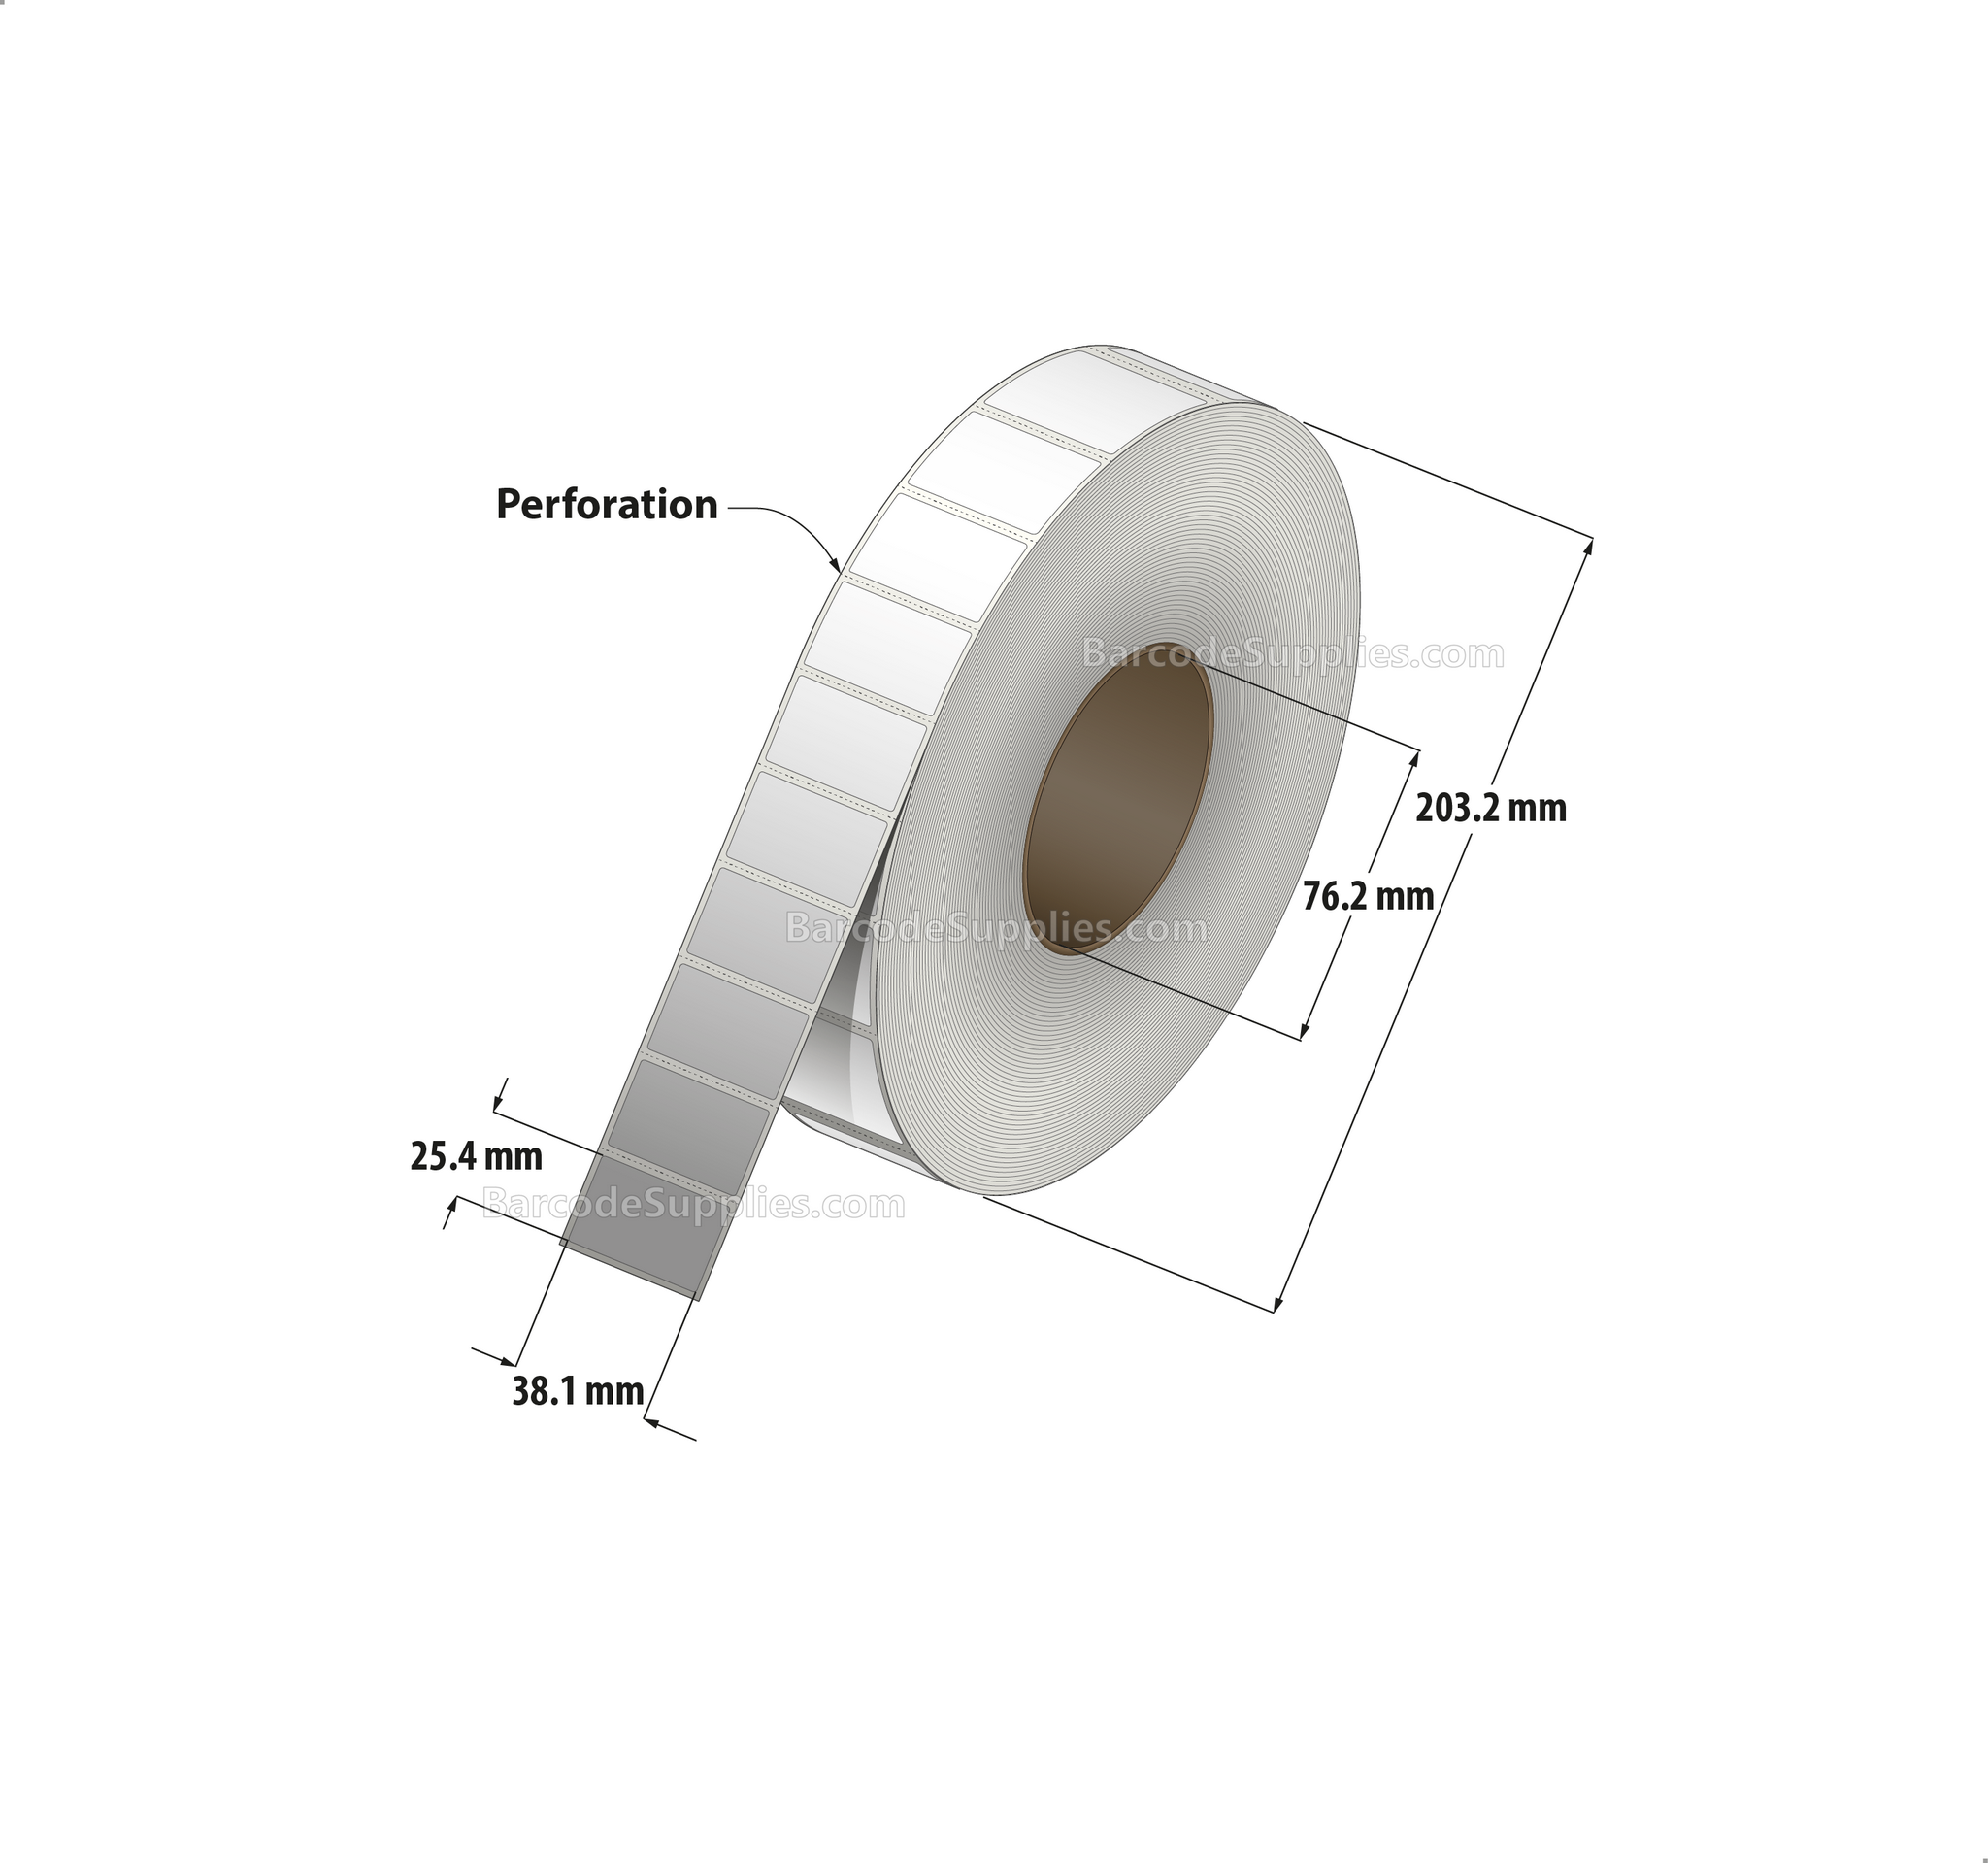 1.5 x 1 Thermal Transfer White Labels With Removable Adhesive - Perforated - 5500 Labels Per Roll - Carton Of 8 Rolls - 44000 Labels Total - MPN: RE-15-1-5500-3